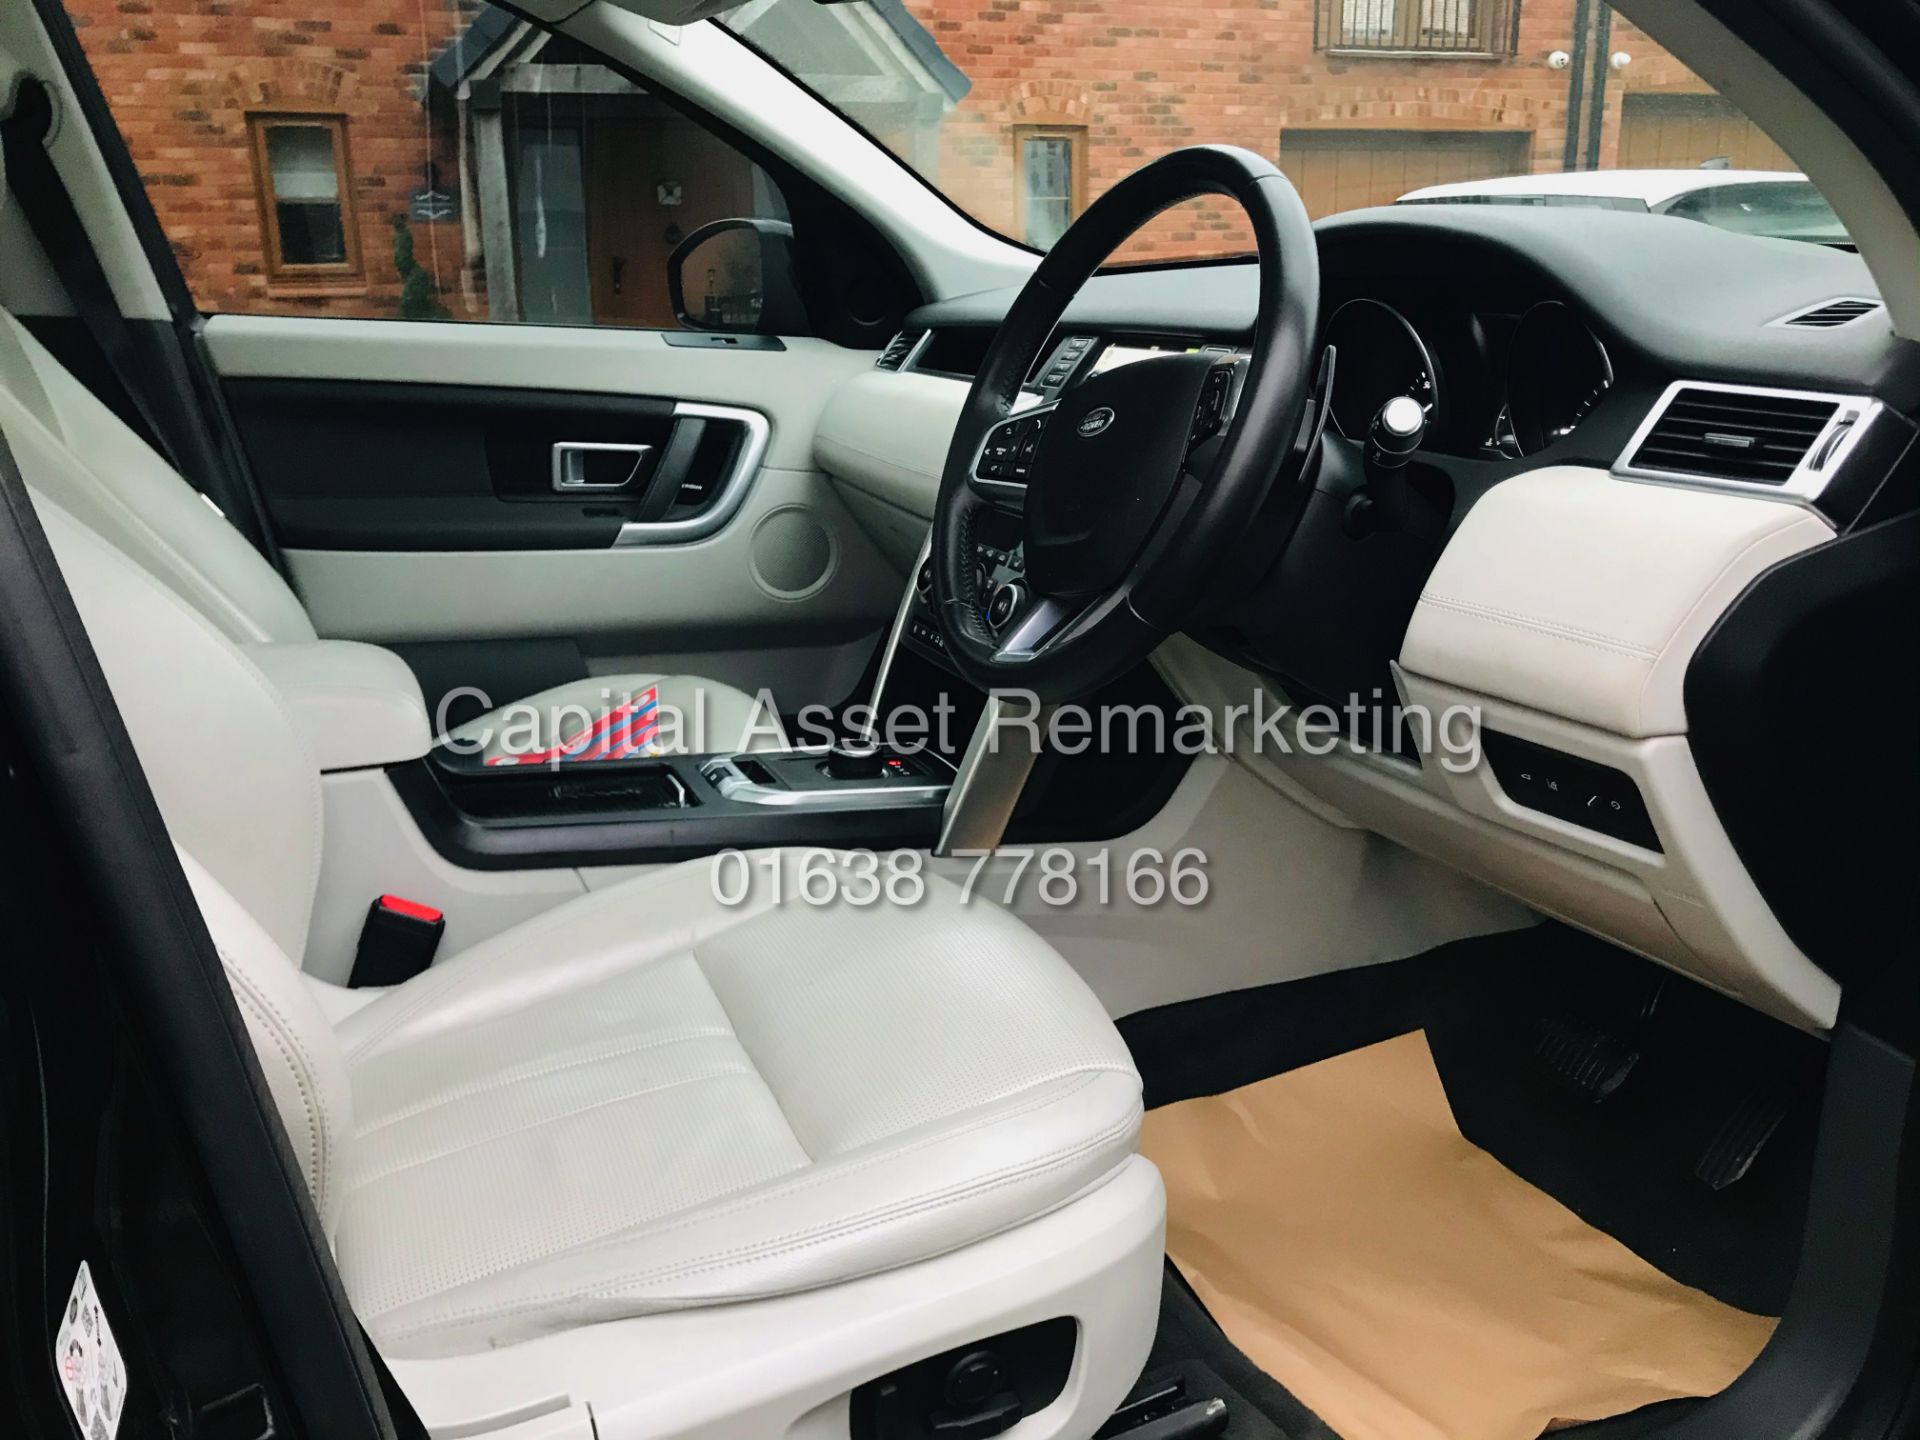 ON SALE LAND ROVER DISCOVERY SPORT "HSE" AUTO 7 SEATER (2019 MODEL) - SAT NAV -LEATHER *PAN ROOF* - Image 13 of 35